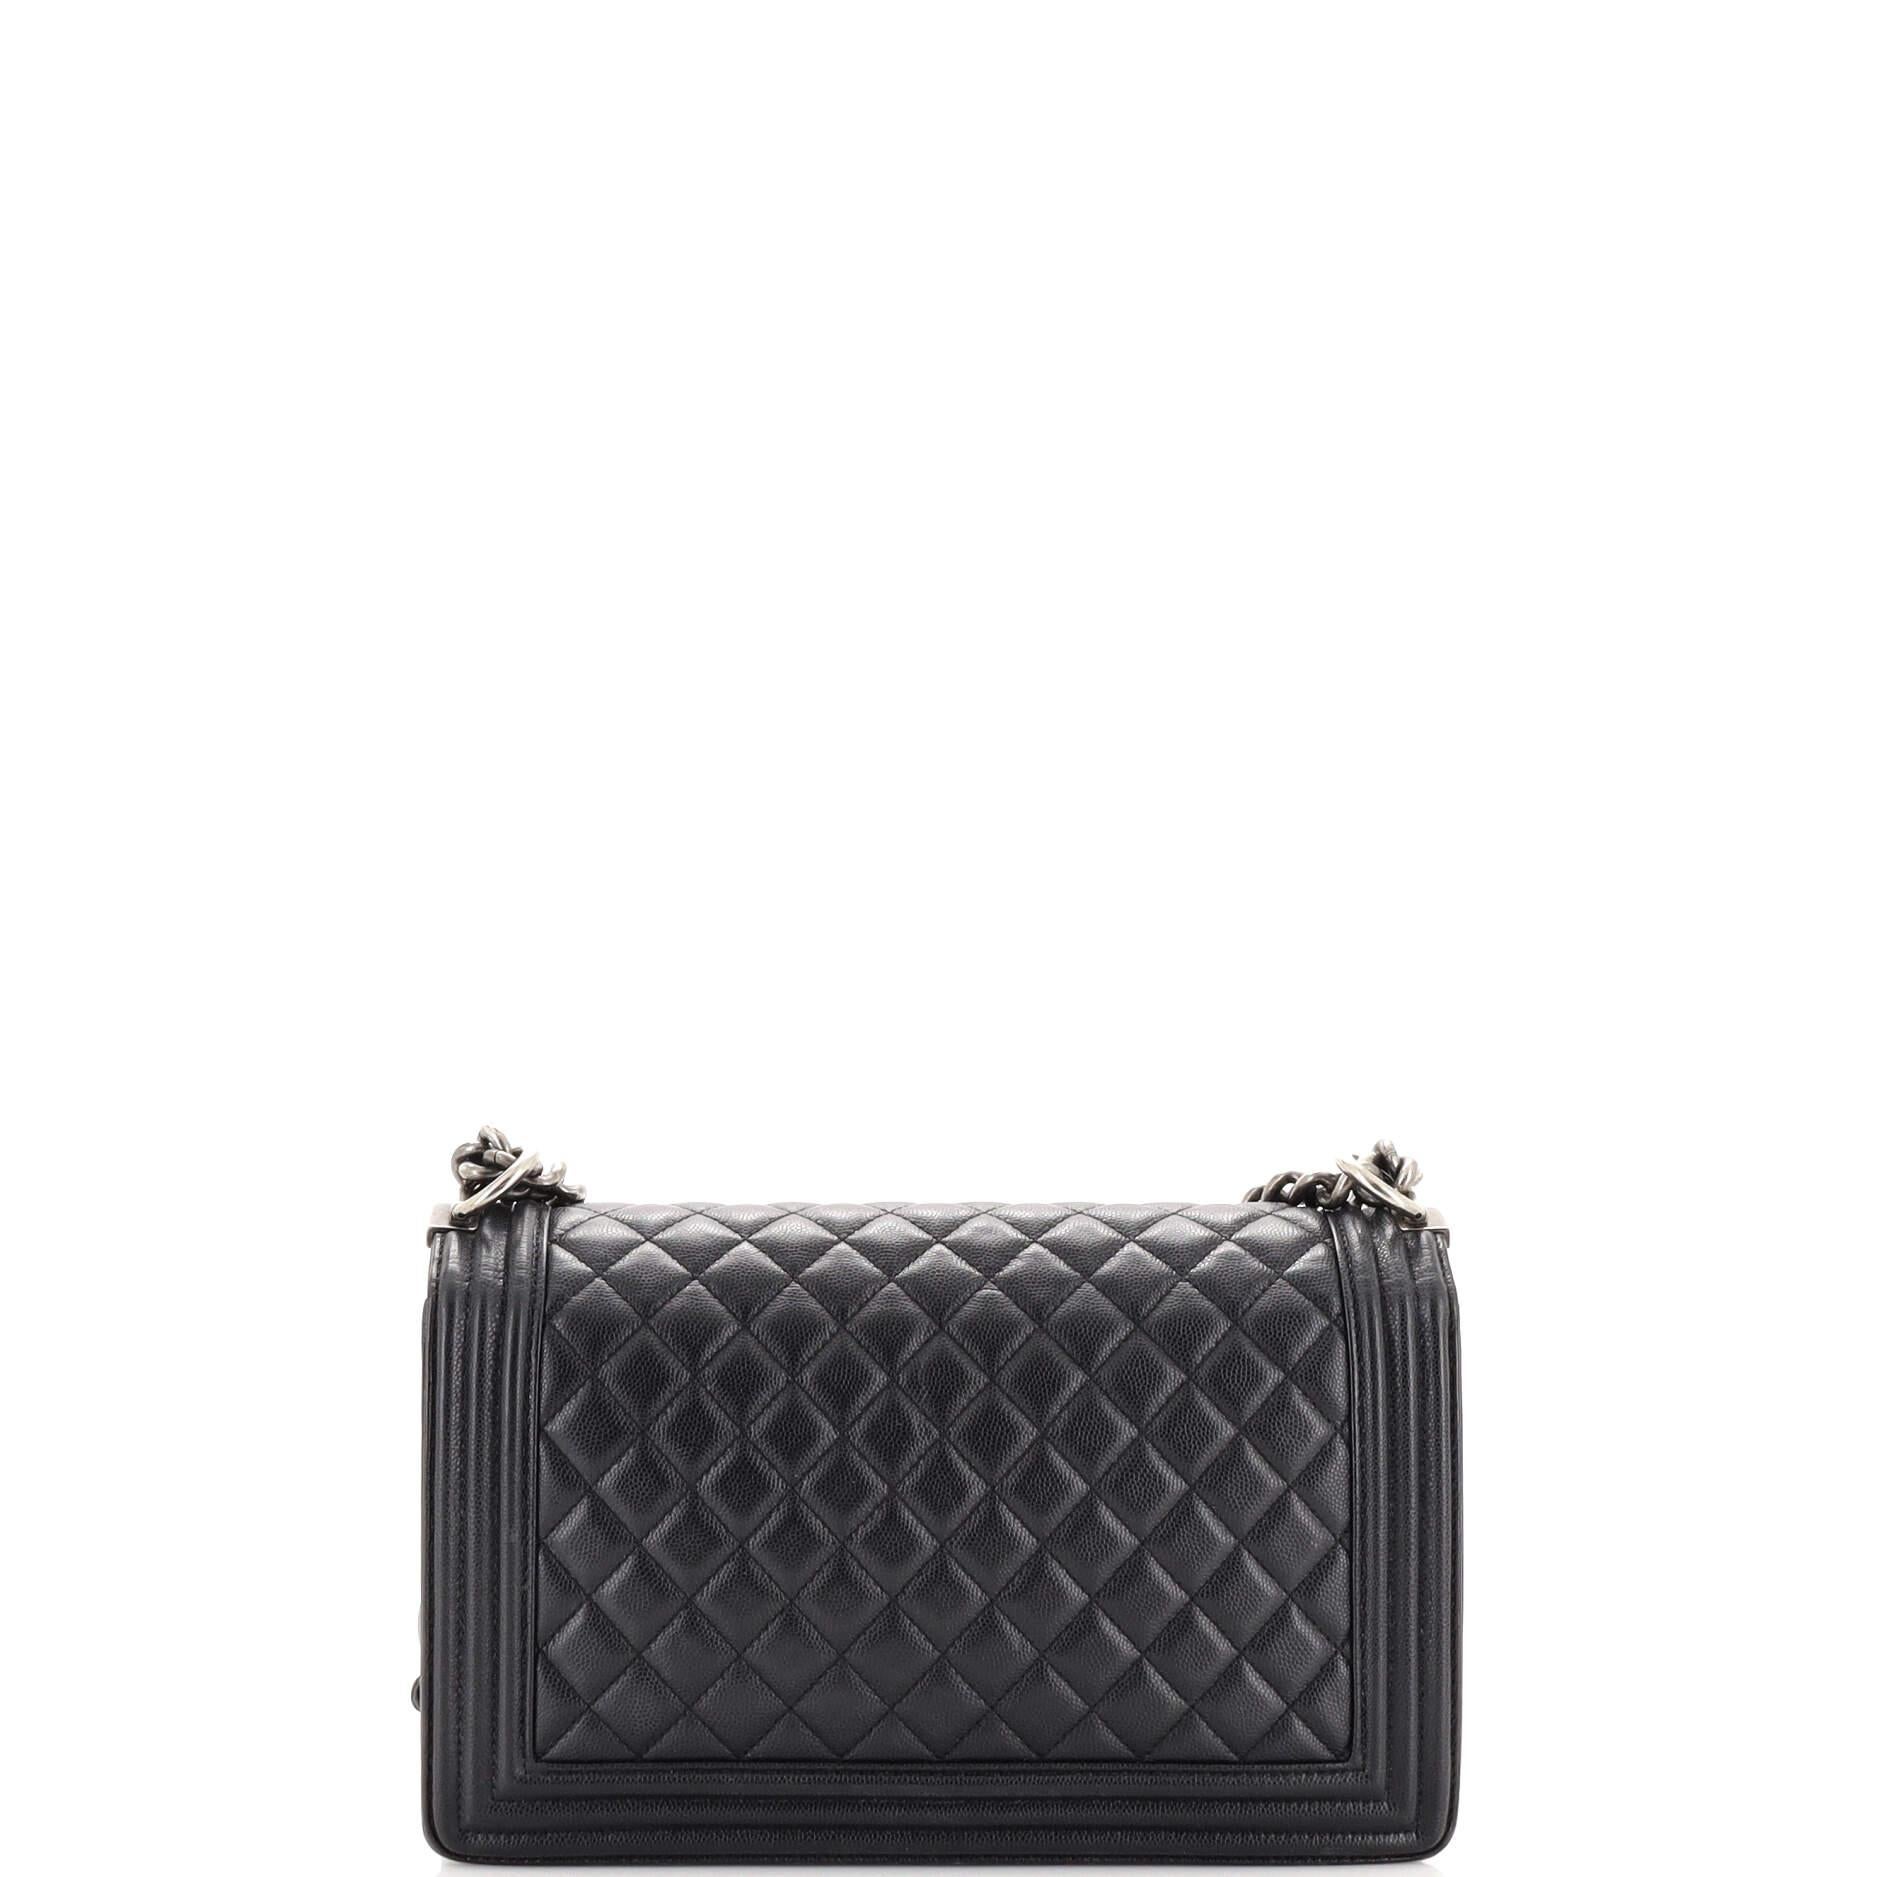 Chanel Boy Flap Bag Quilted Caviar New Medium In Good Condition For Sale In NY, NY